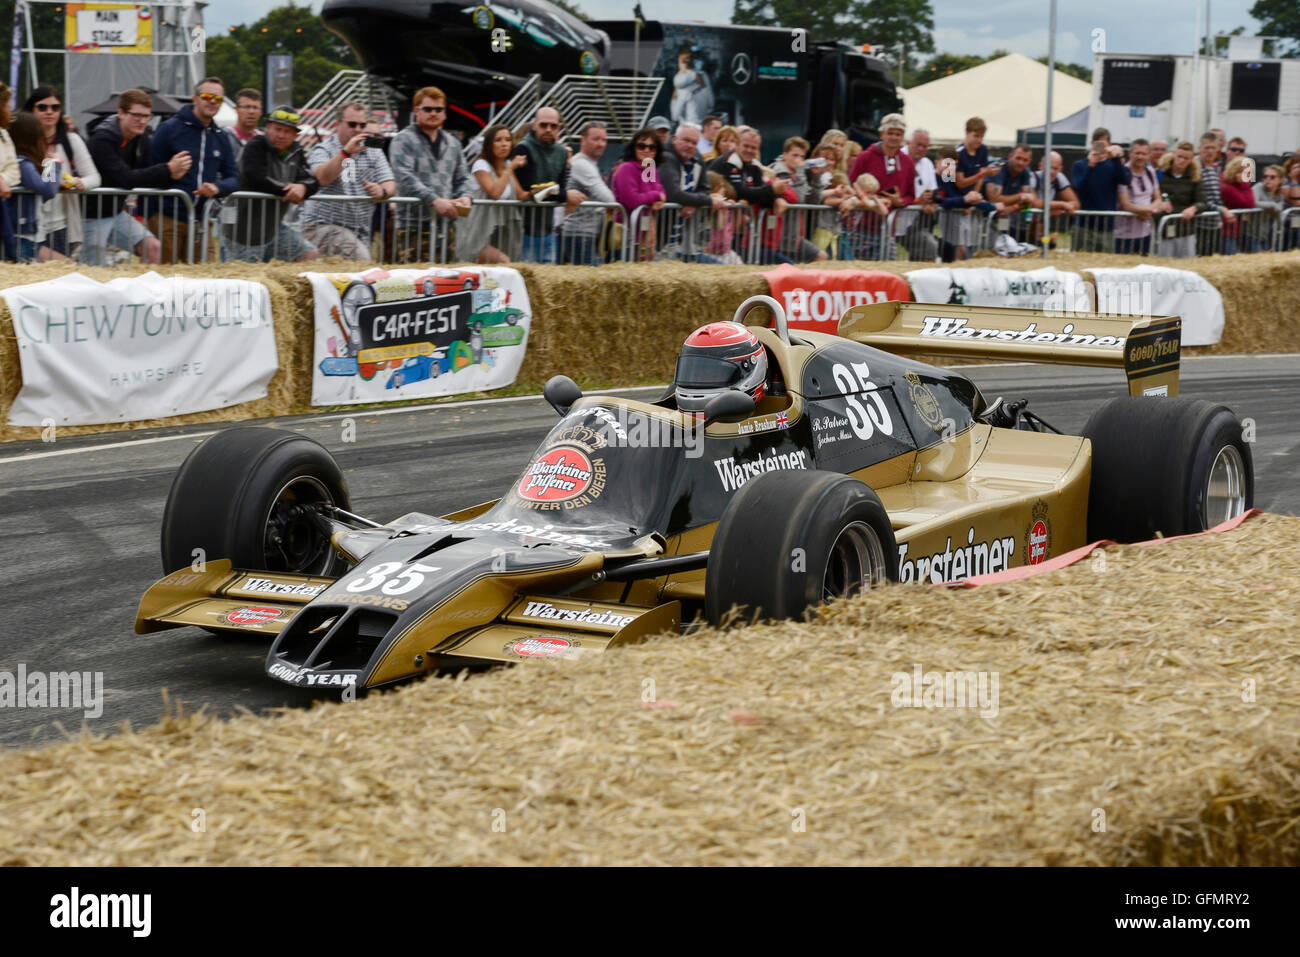 Carfest North, Bolesworth, Cheshire, UK. 31st July 2016. An Arrows F1 car taking to the track. The event is the brainchild of Chris Evans and features 3 days of cars, music and entertainment with profits being donated to the charity Children in Need. Andrew Paterson/Alamy Live News Stock Photo